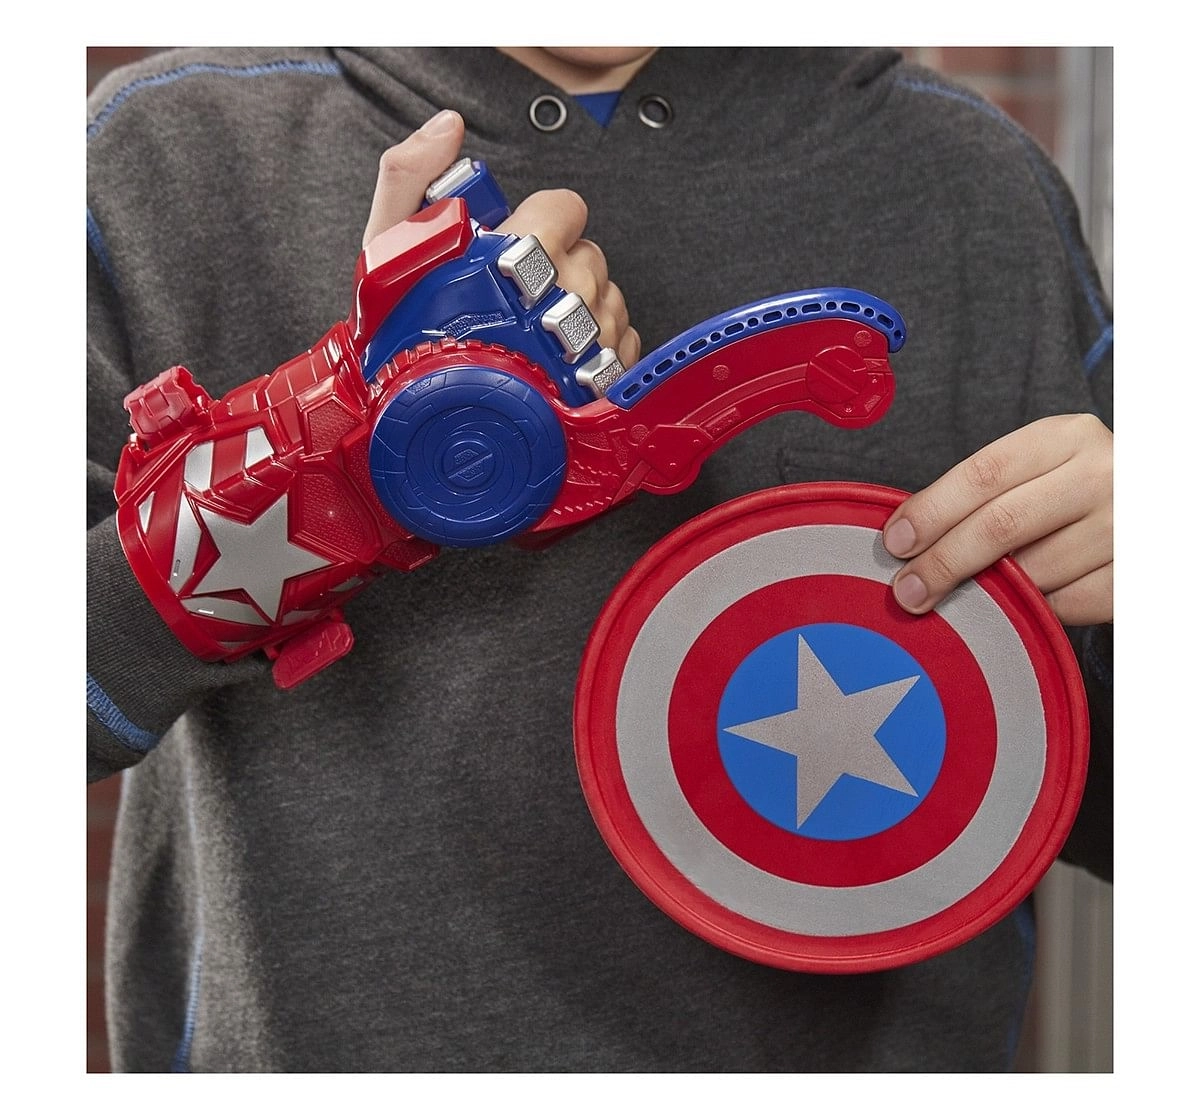 Marvel Nerf Power Moves Avengers Captain America Shield Action Figure Play Sets for Kids age 5Y+ 